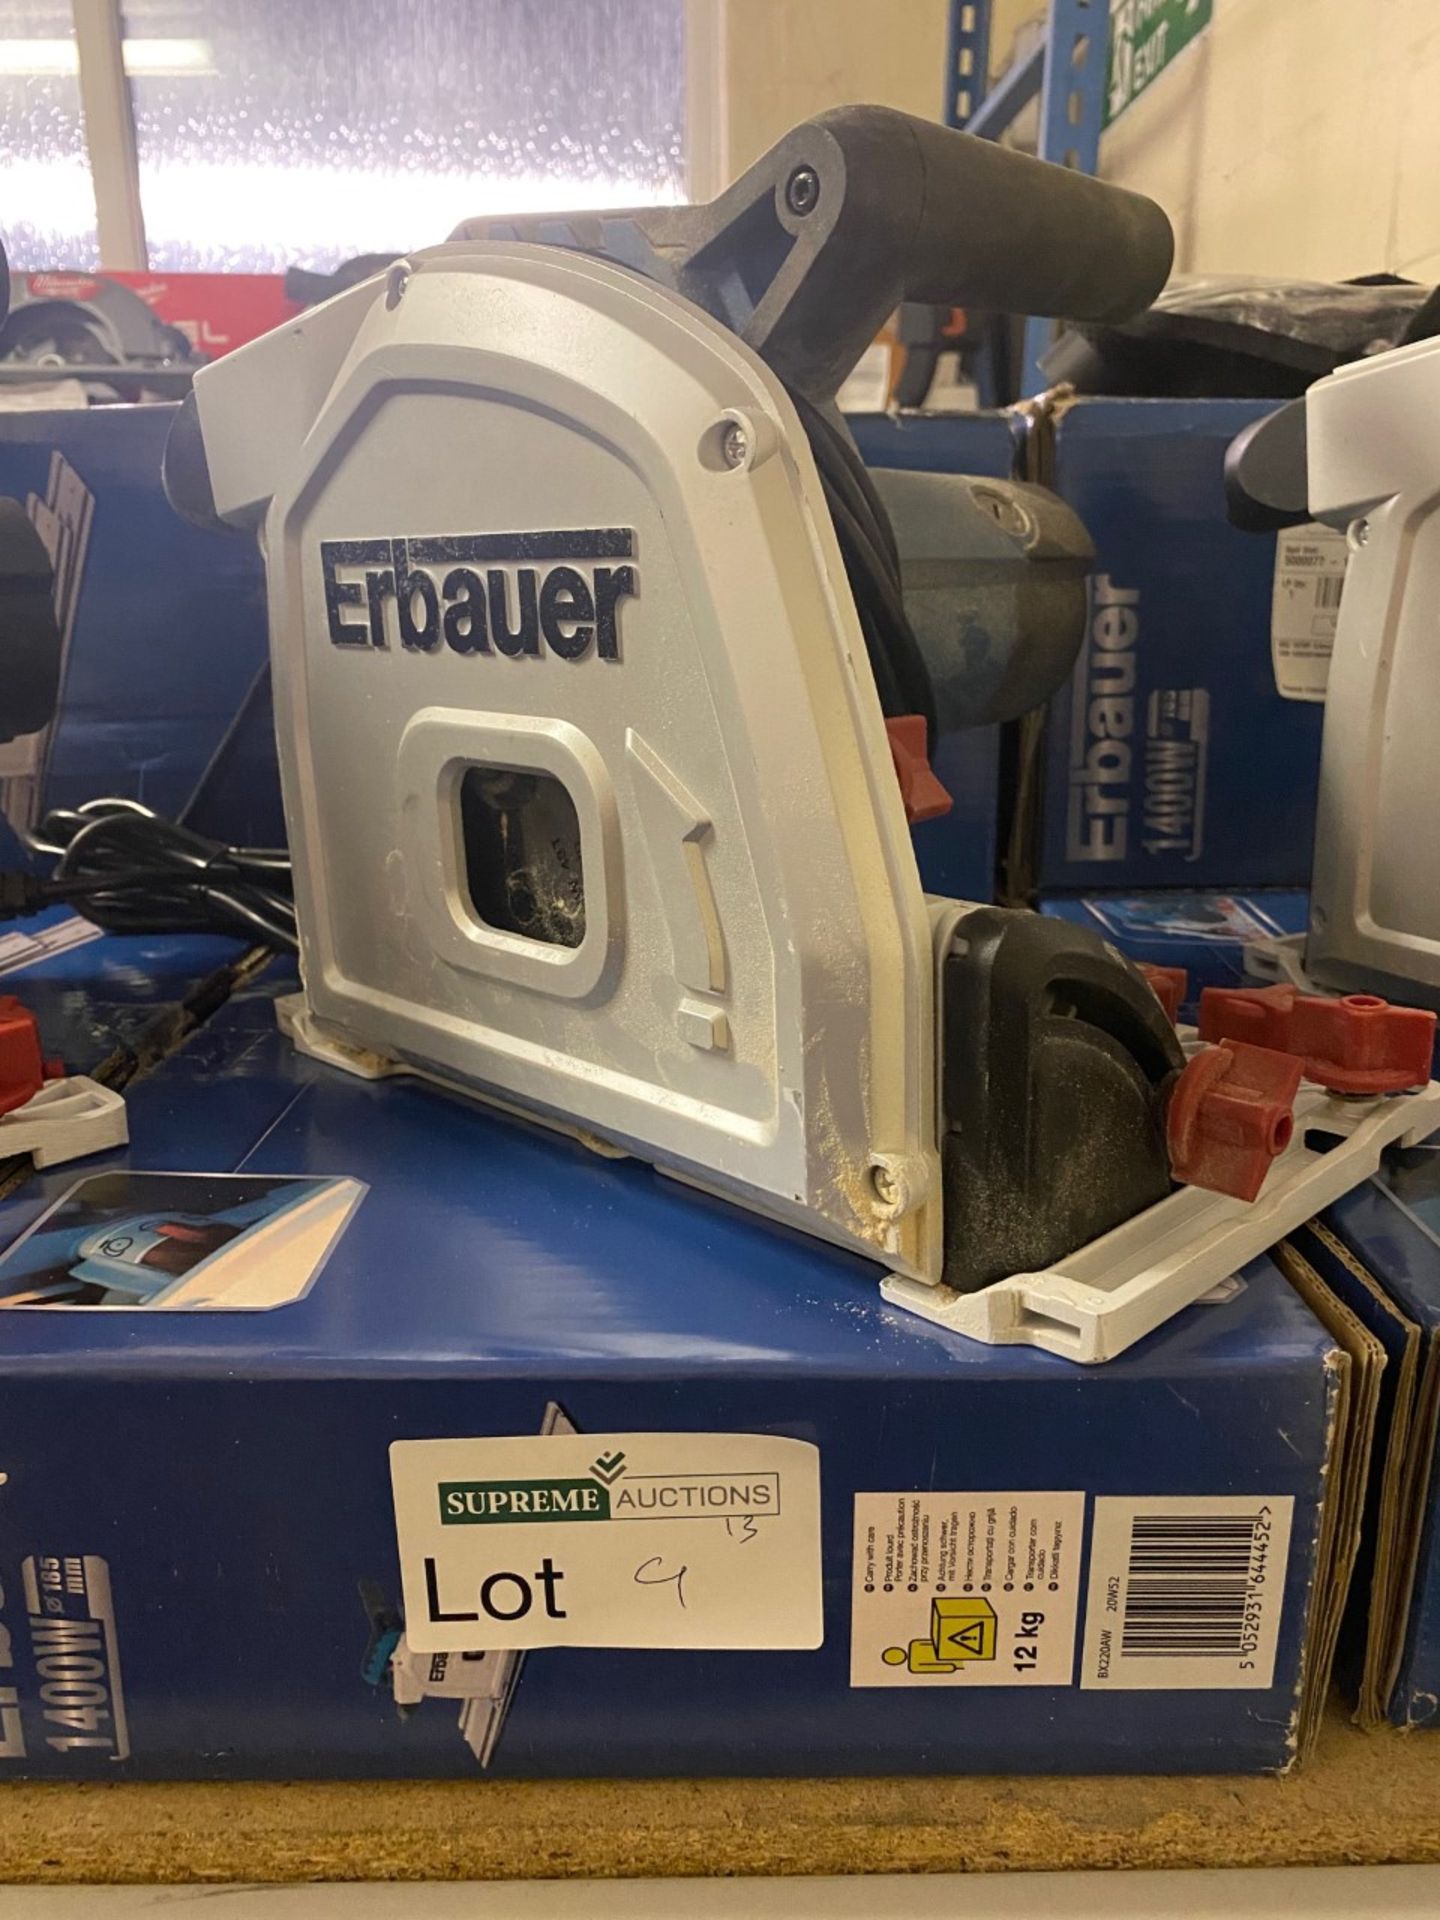 ERBAUER ERB690CSW 185MM ELECTRIC PLUNGE SAW 240V COMES WITH BOX (UNCHECKED)